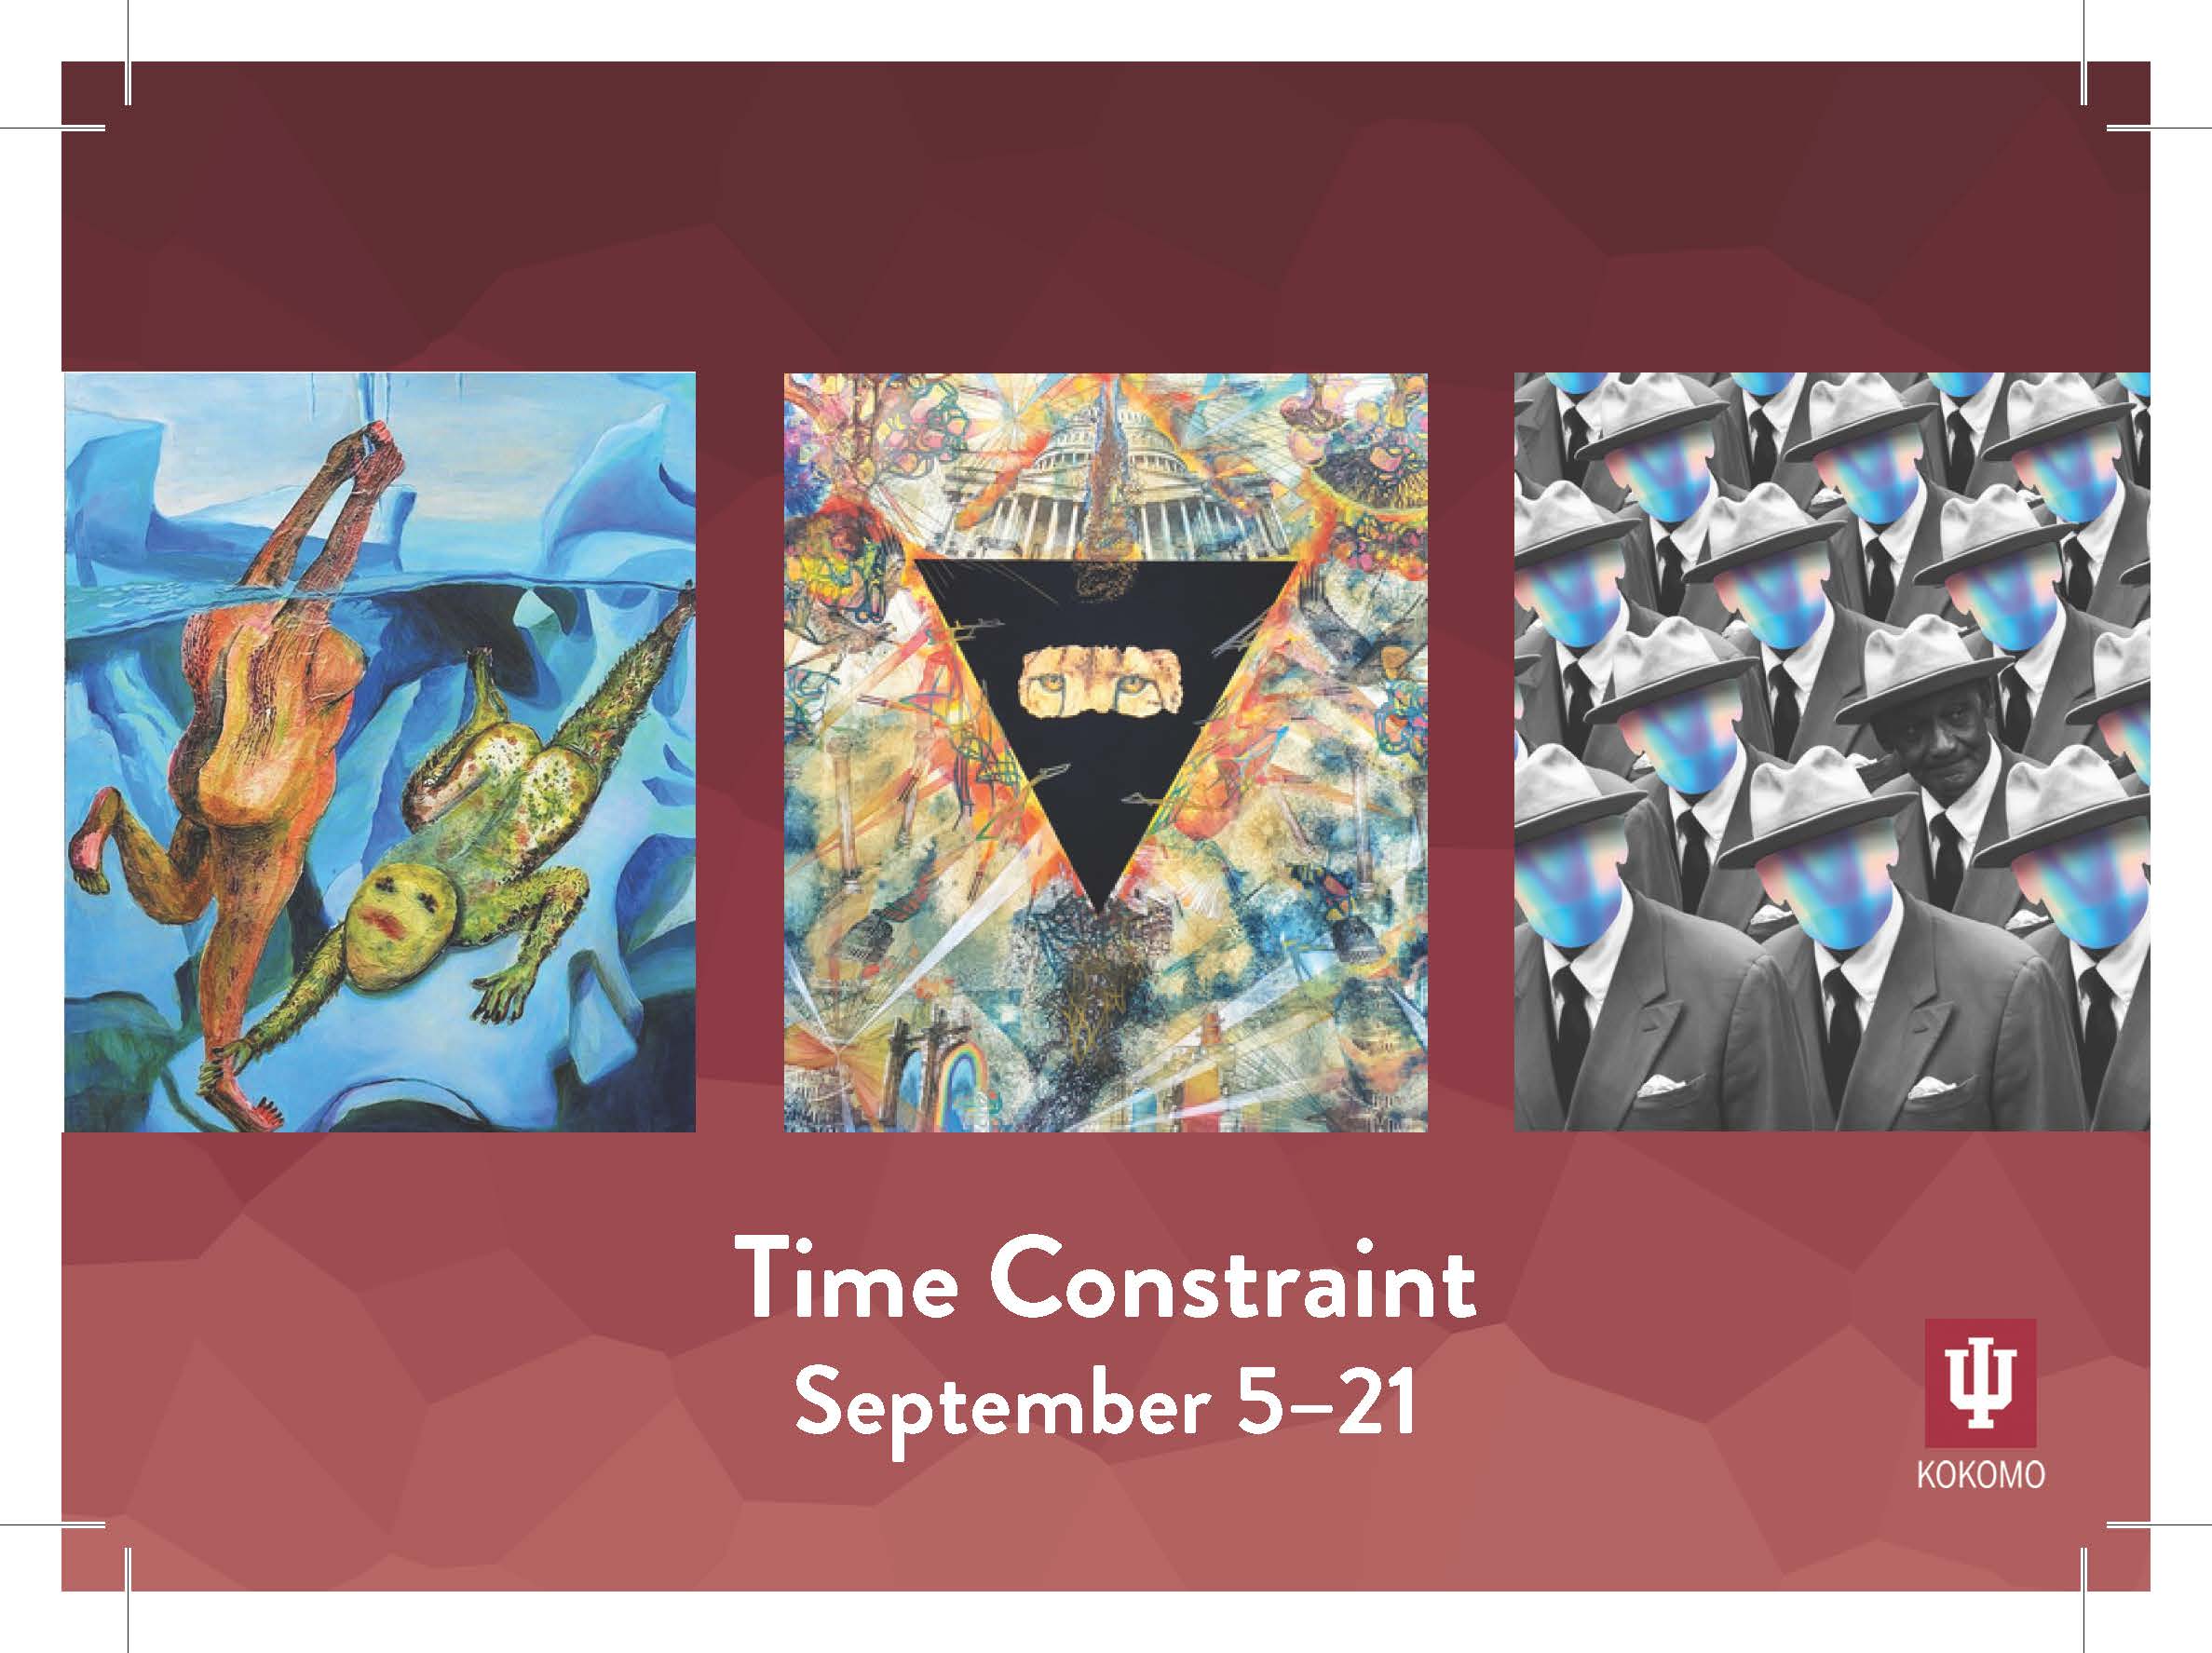 Time Constraint Exhibit September 5 to 21